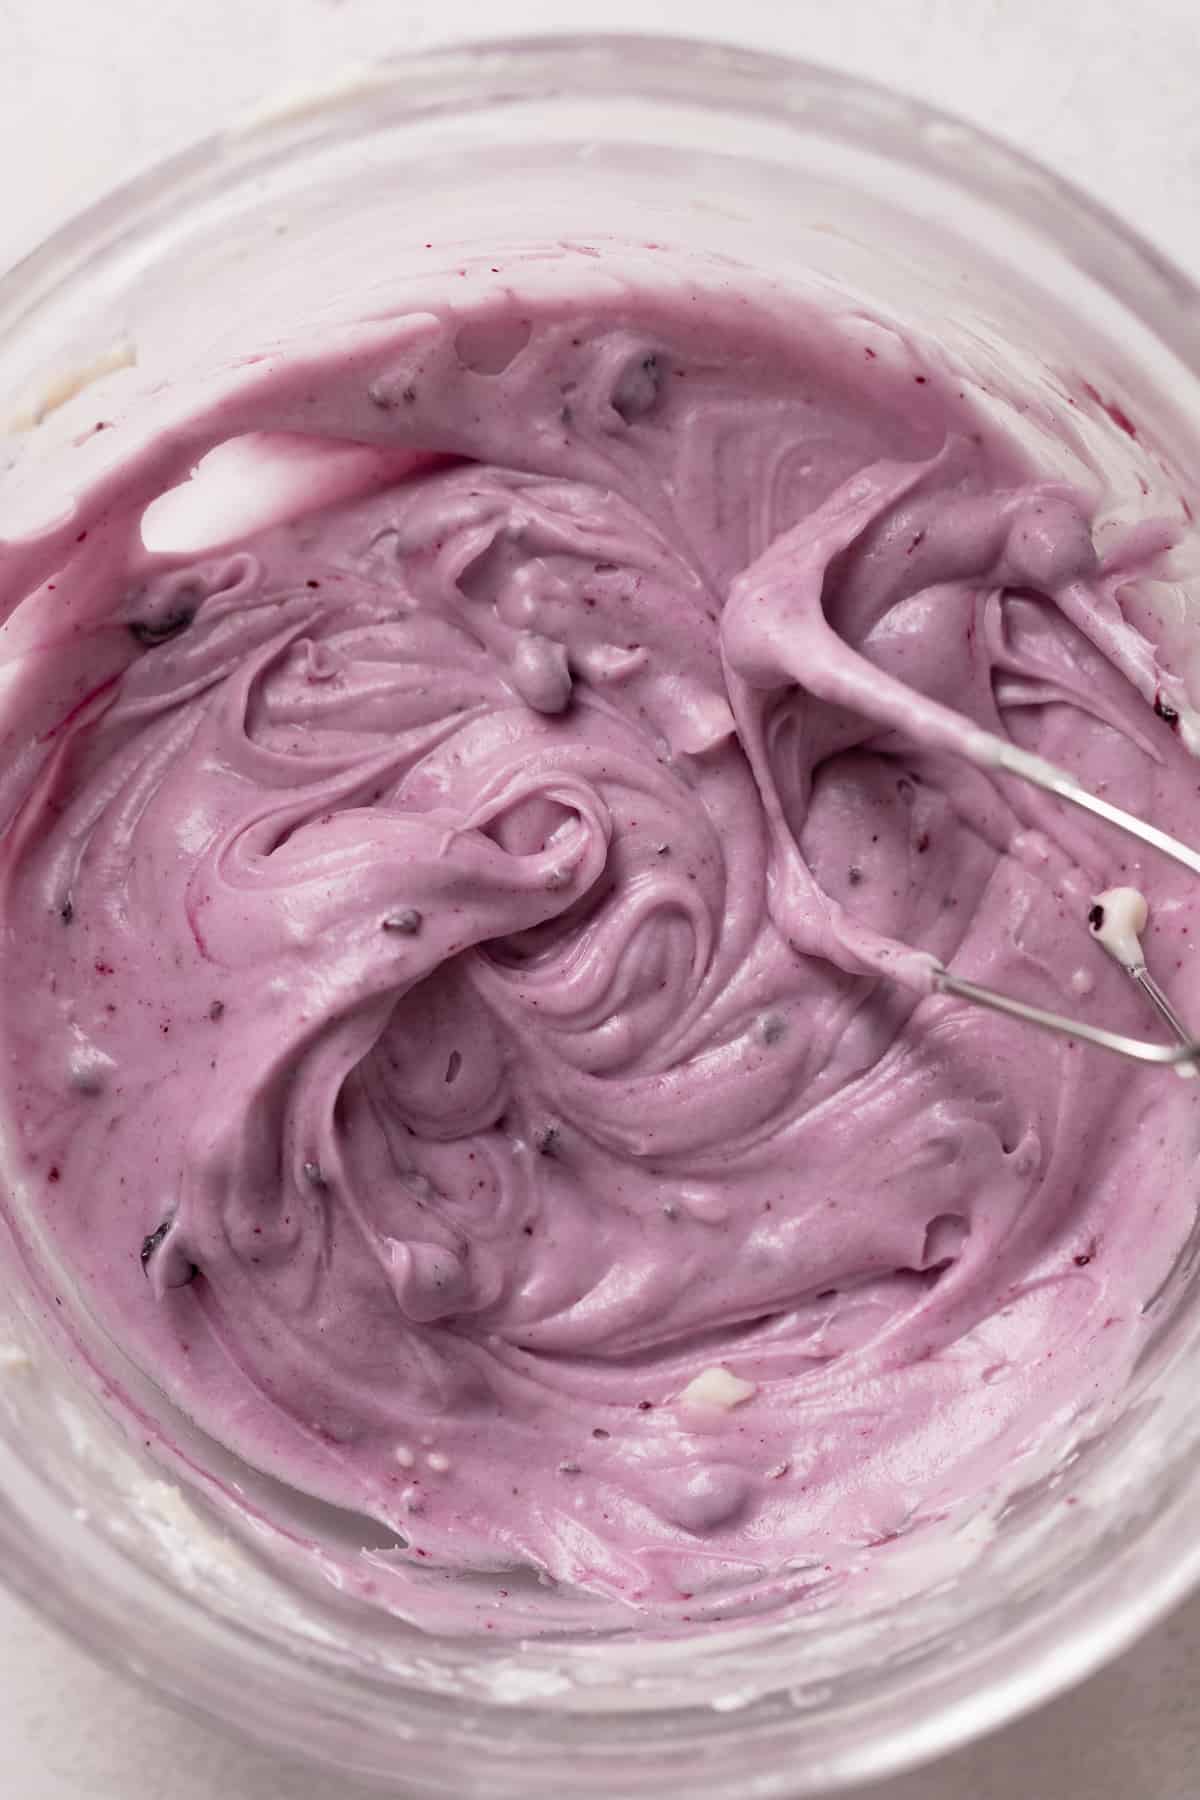 blueberry cream cheese frosting in a mixing bowl.